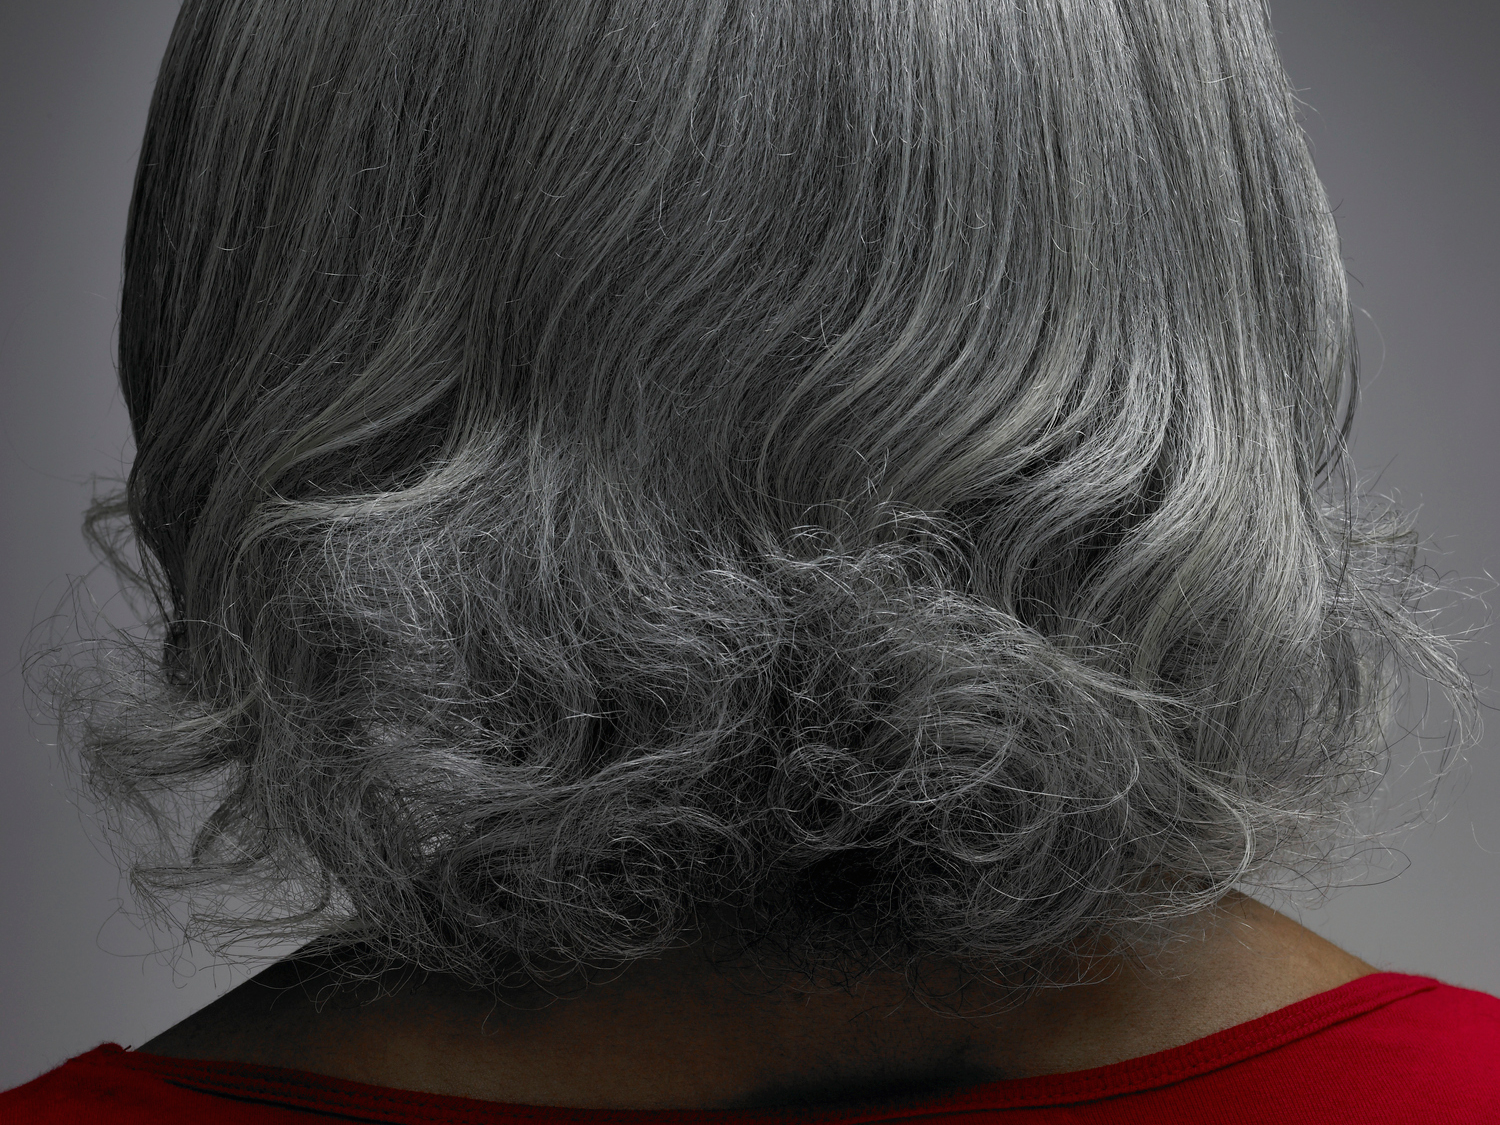 Can stress really turn your hair gray?